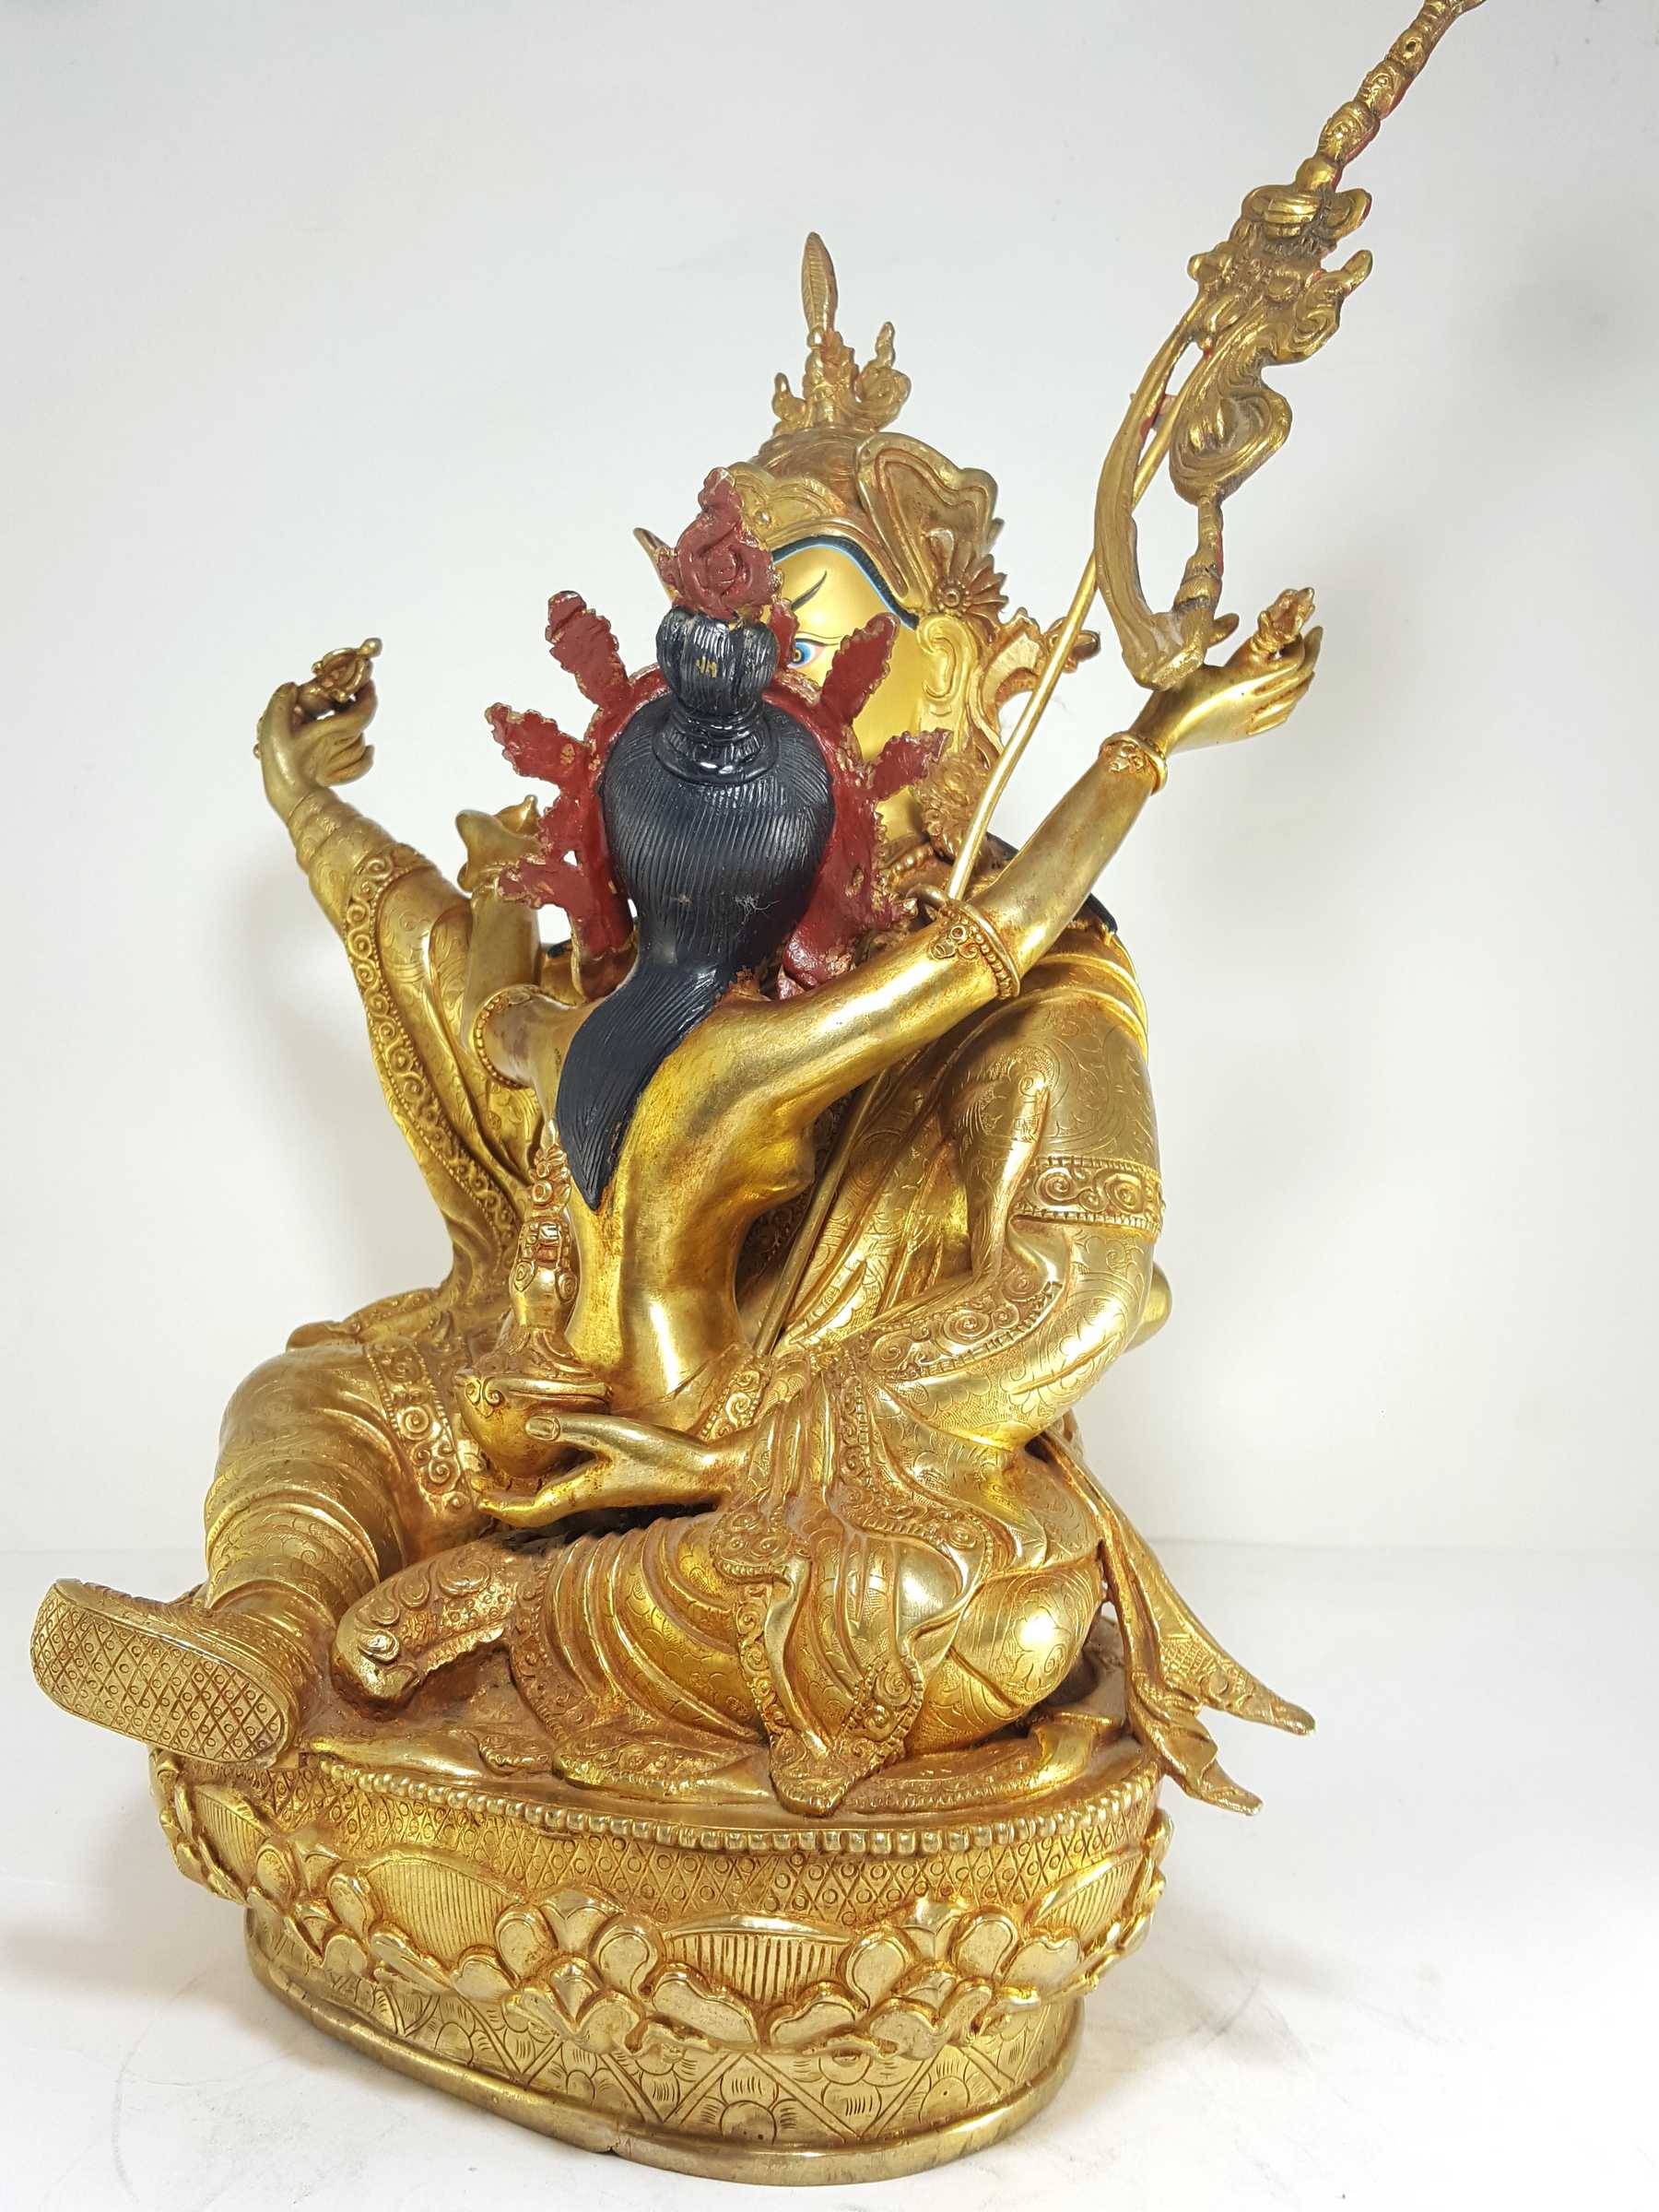 Statue Of Padmasambhava With Consort, shakti, Yab-yum full Gold Plated With painted Face